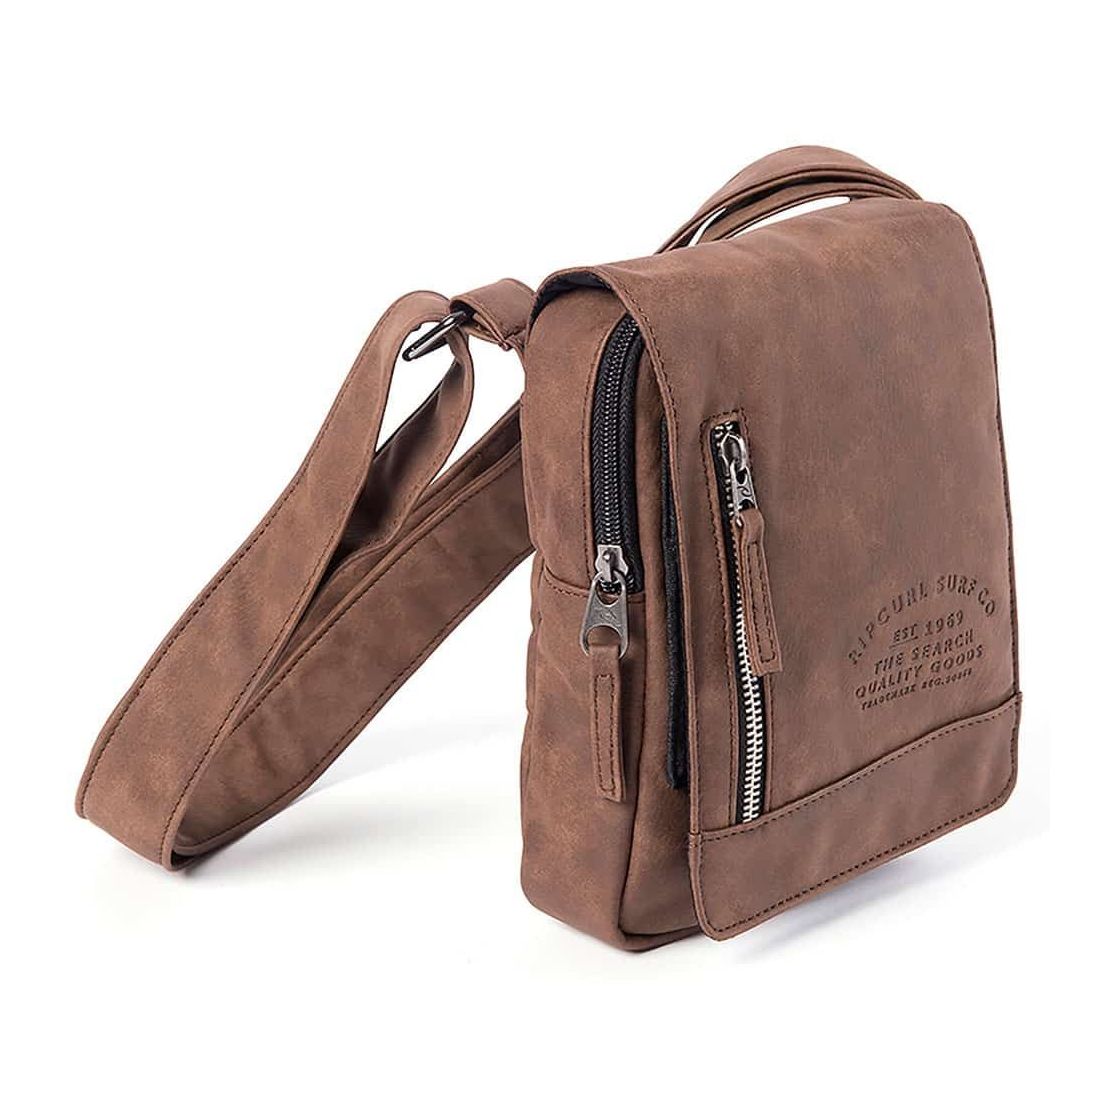 Rip Curl Bag Leazard Pouch Brown - Backpacks - Bags